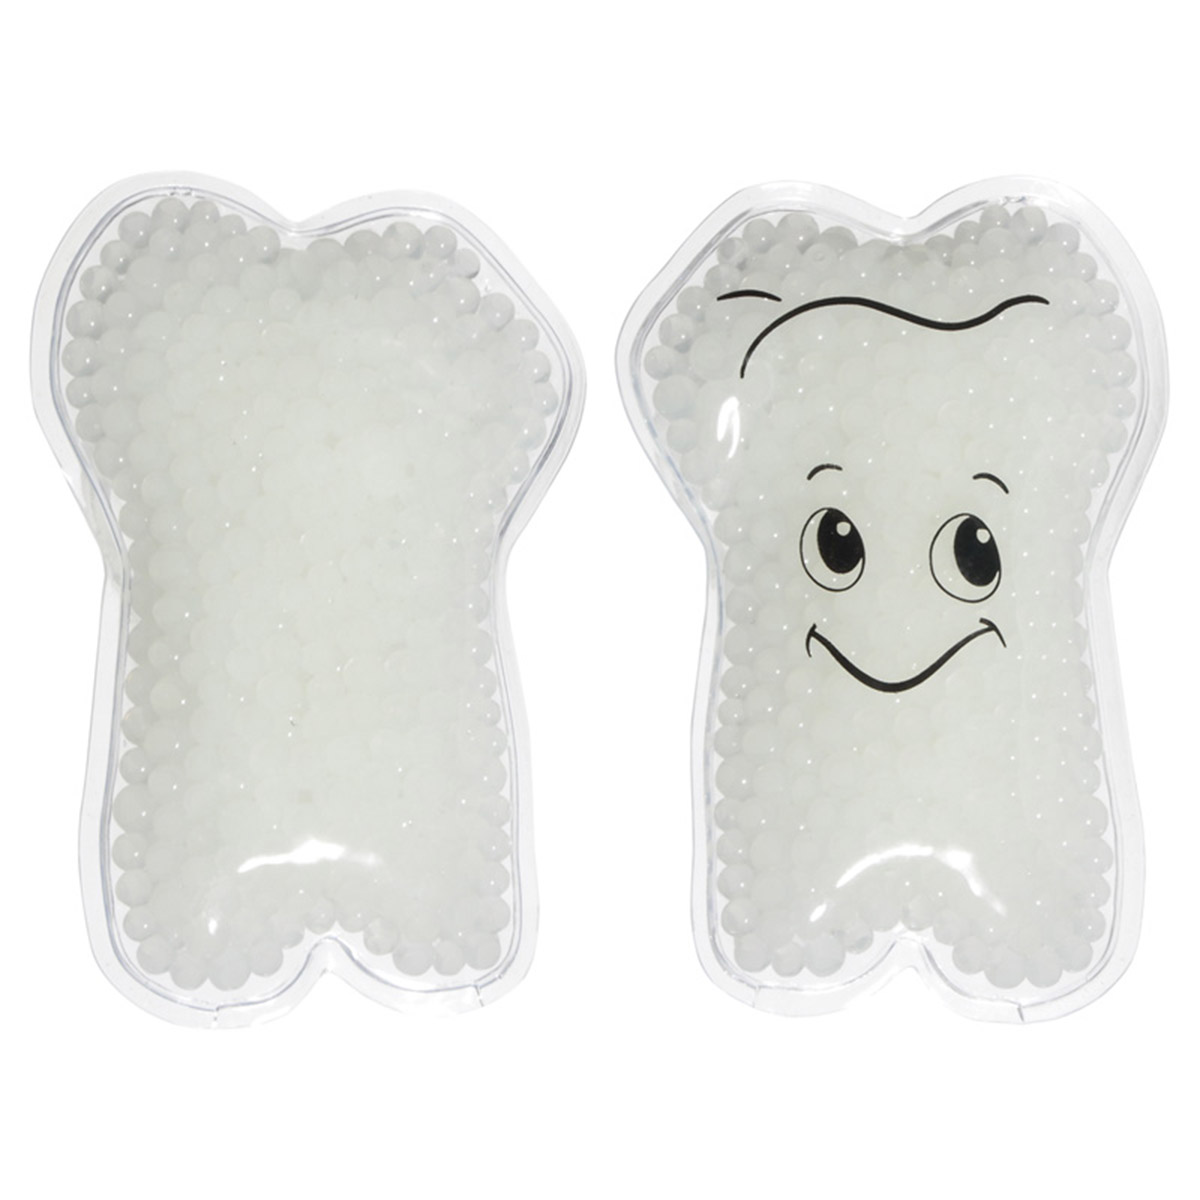 Pad Print 1 Color 1 Location Aqua Pearls Tooth Hot/Cold Pack